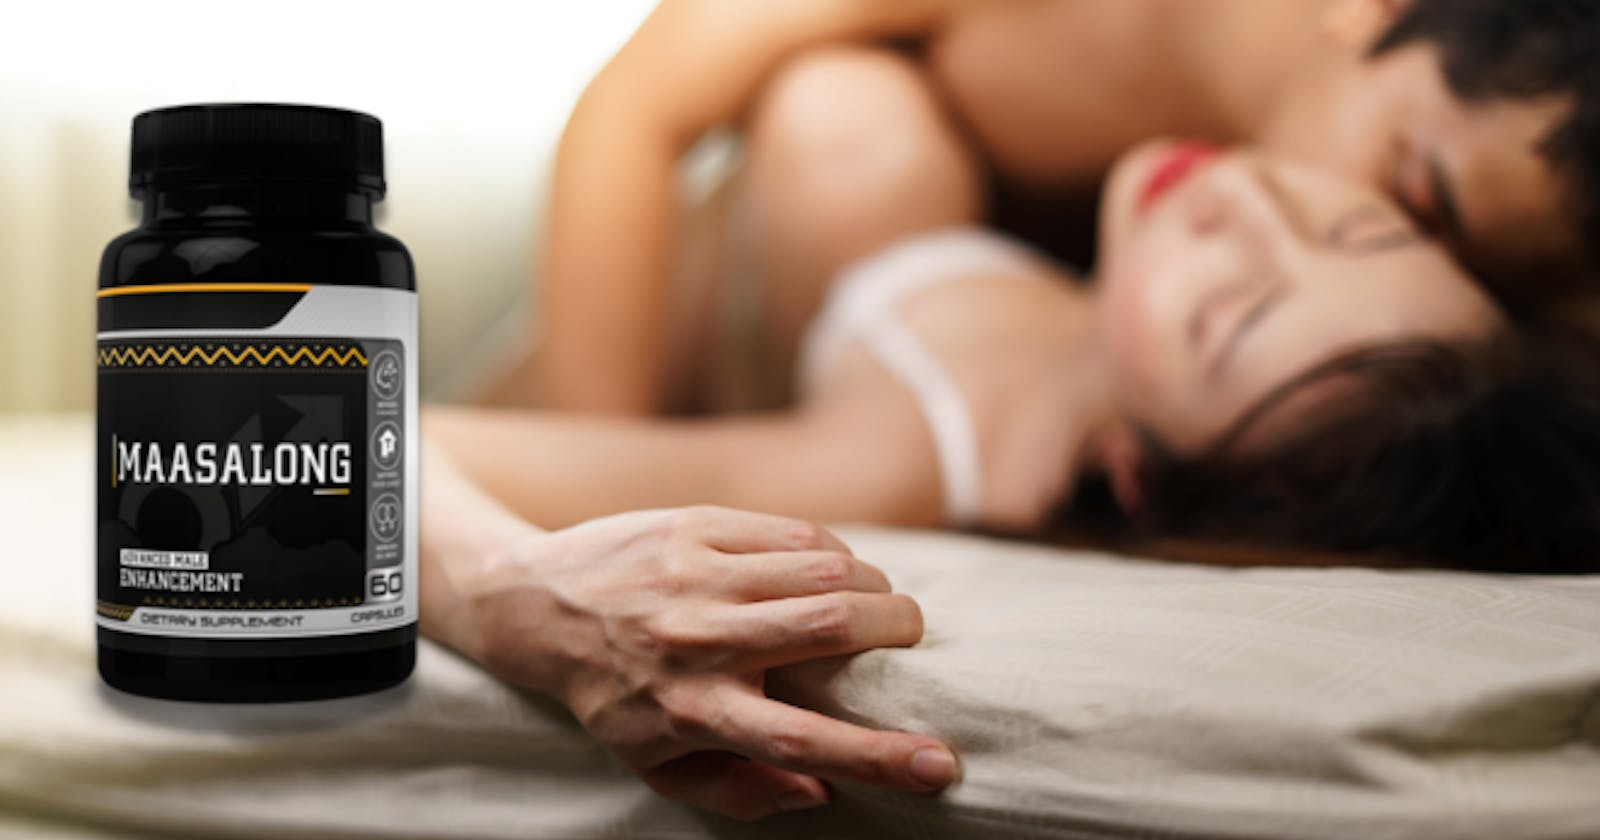 Maasalong Male Enhancement Benefits: Is It Really Work Or Scam?